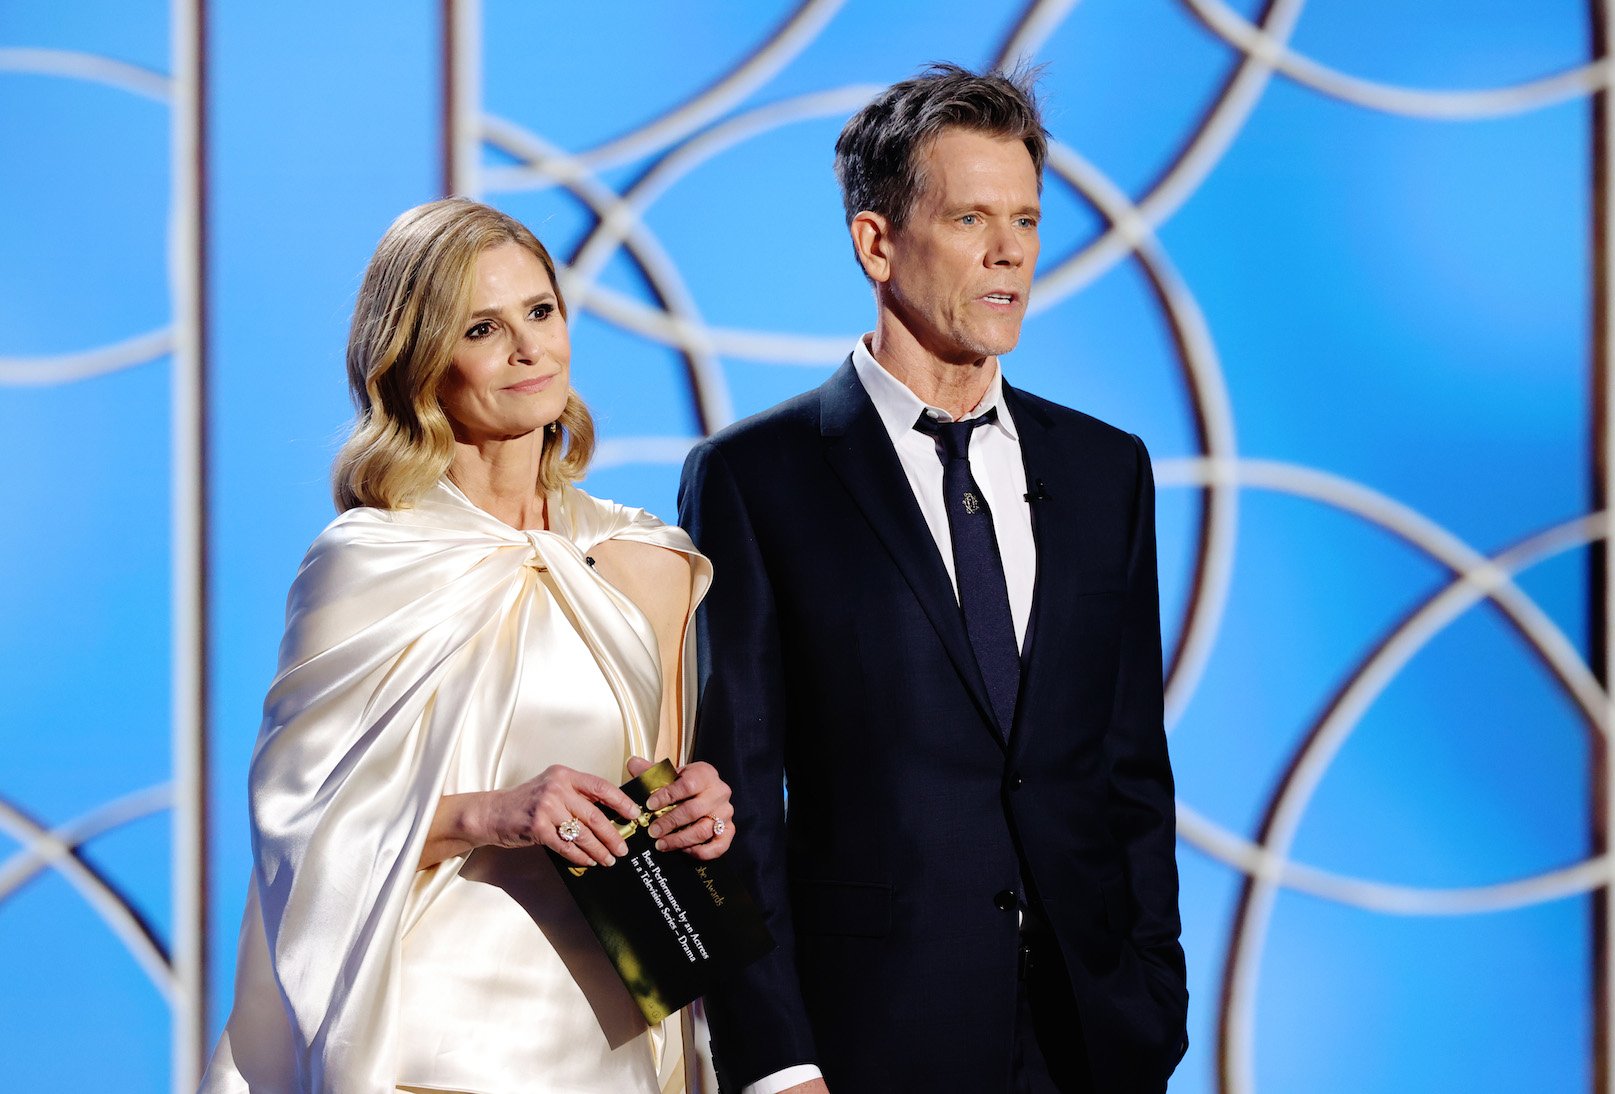 Kyra Sedgwick and Kevin Bacon standing next to each other speaking onstage at the 78th Annual Golden Globe Awards